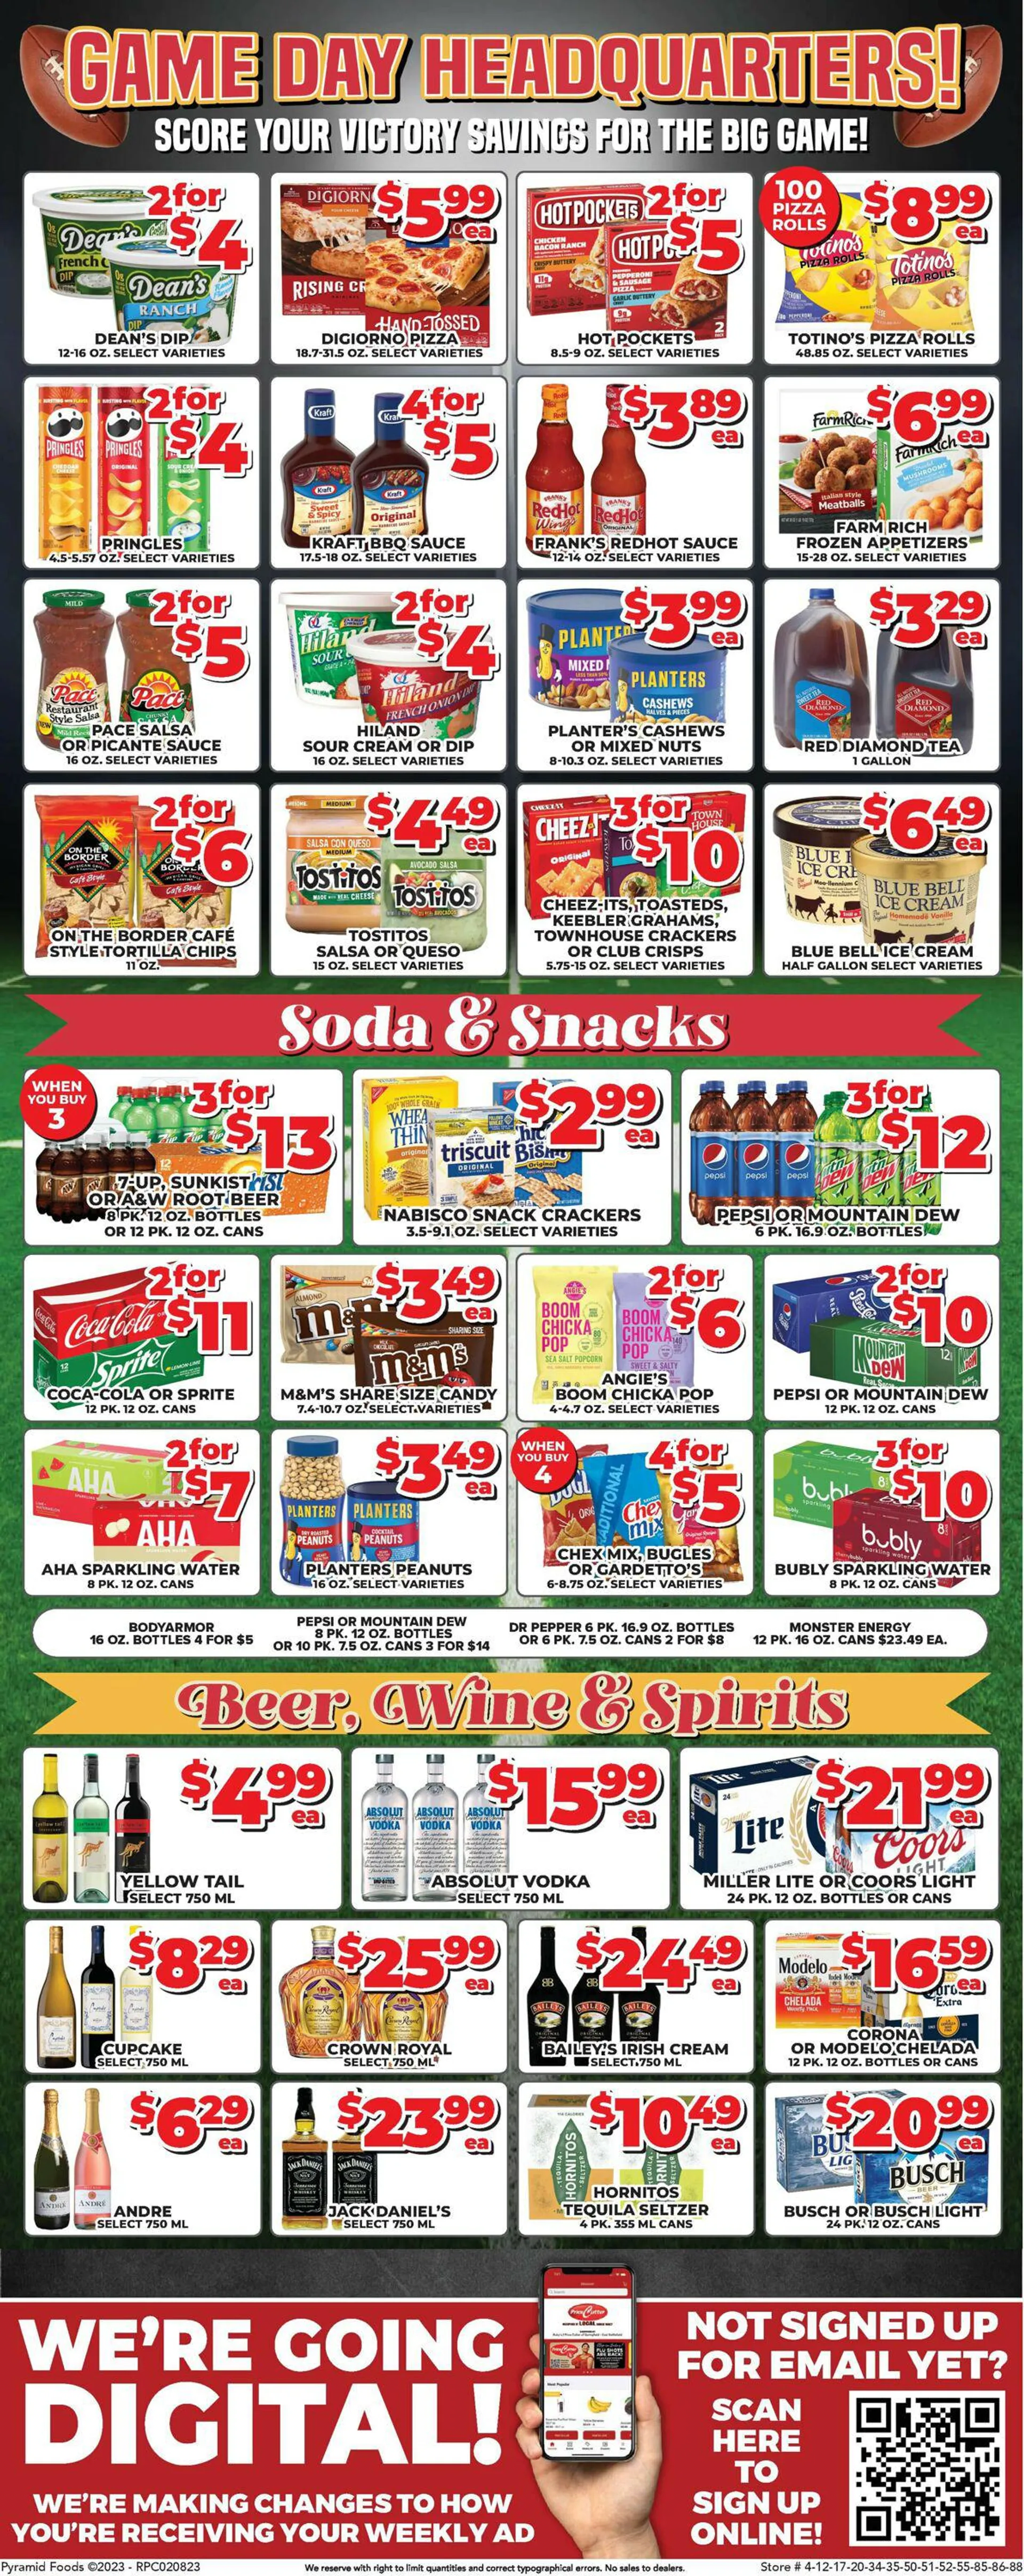 Price Cutter Current weekly ad - 6